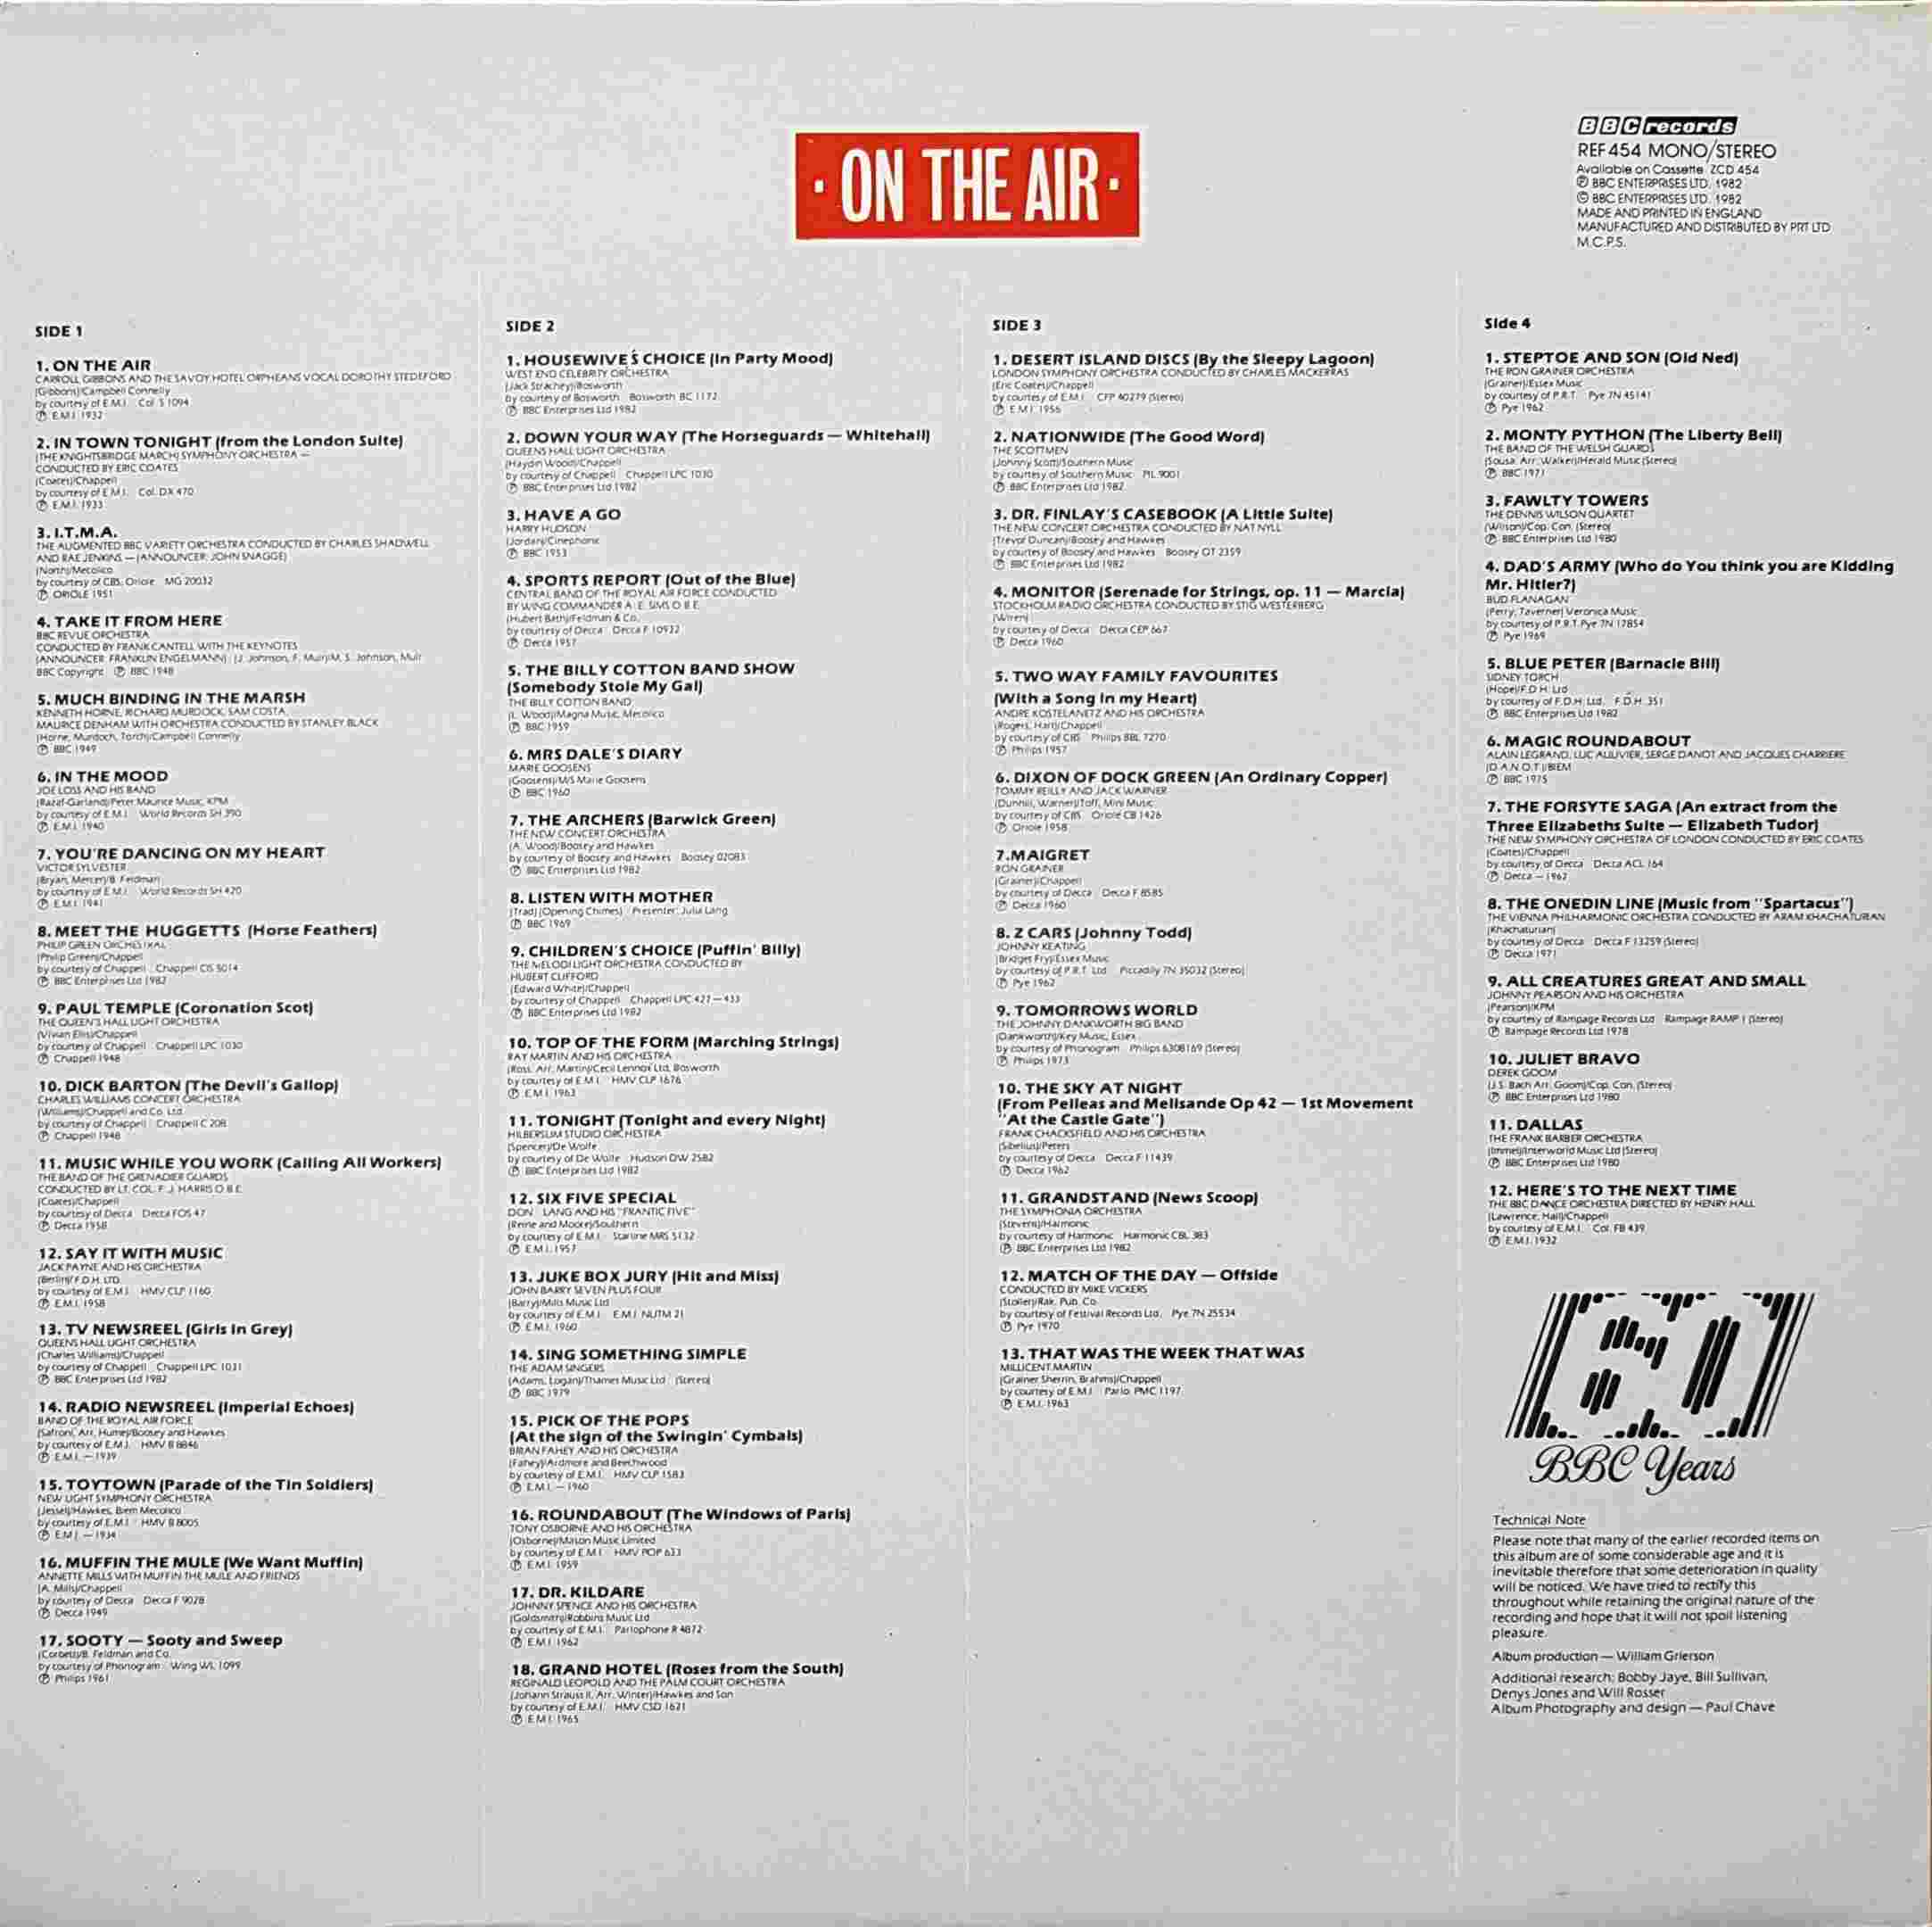 Picture of REF 454 On the air - 60 years of BBC themes by artist Various from the BBC records and Tapes library